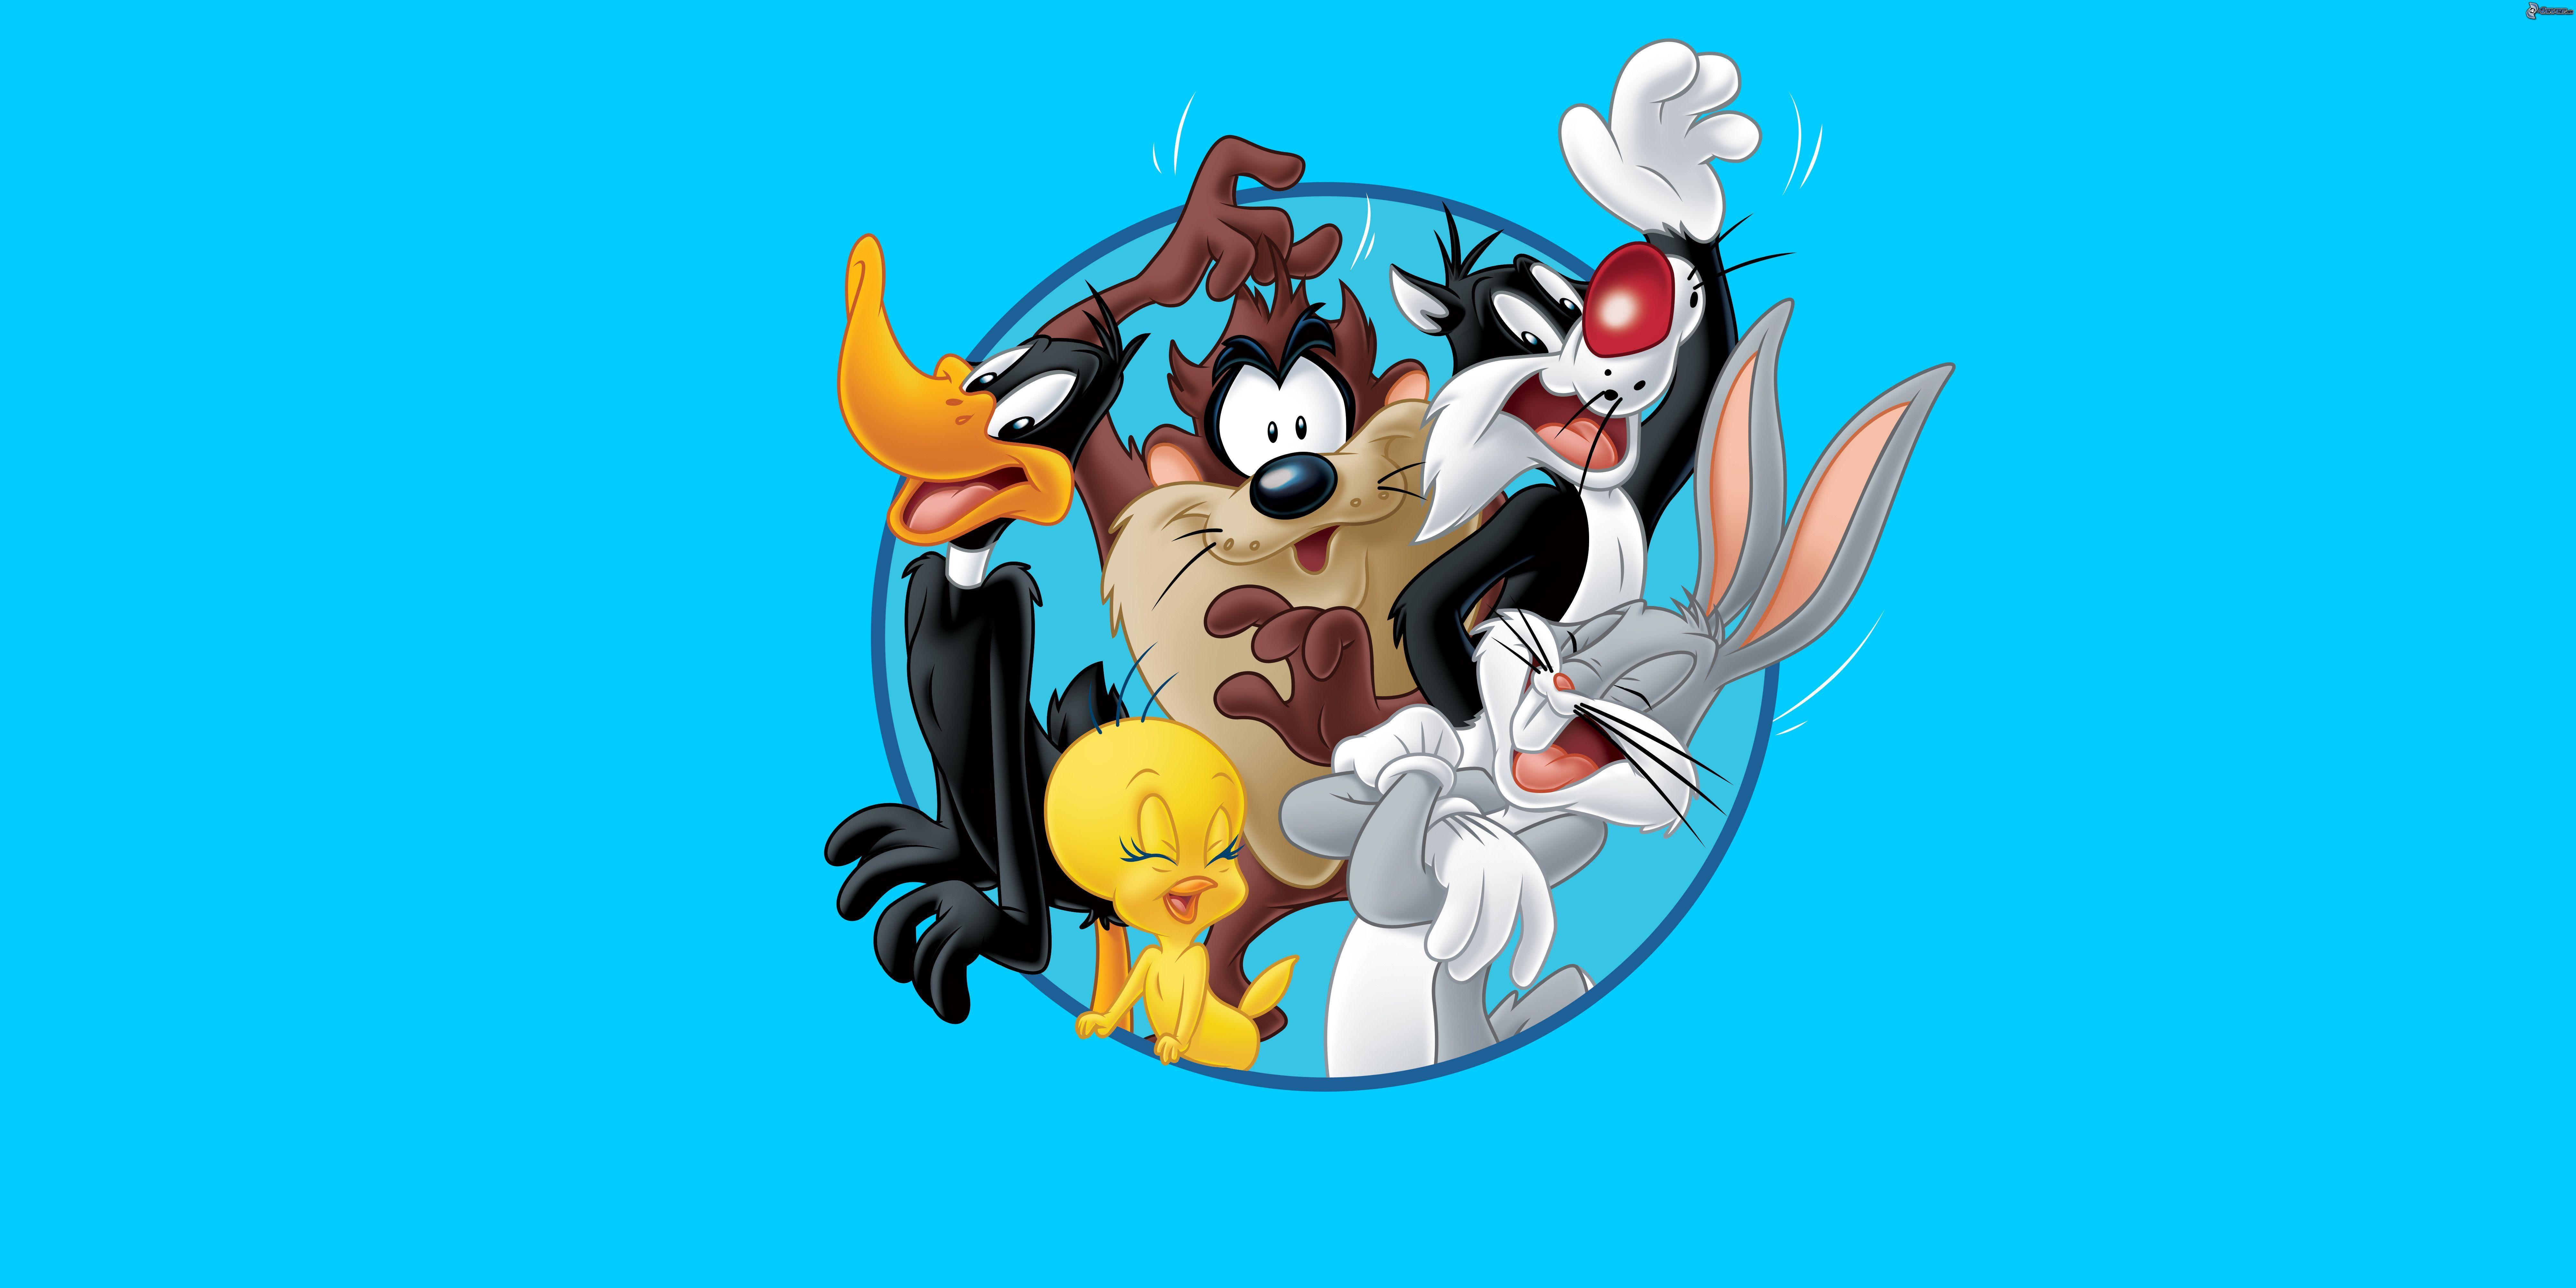 Looney tunes characters